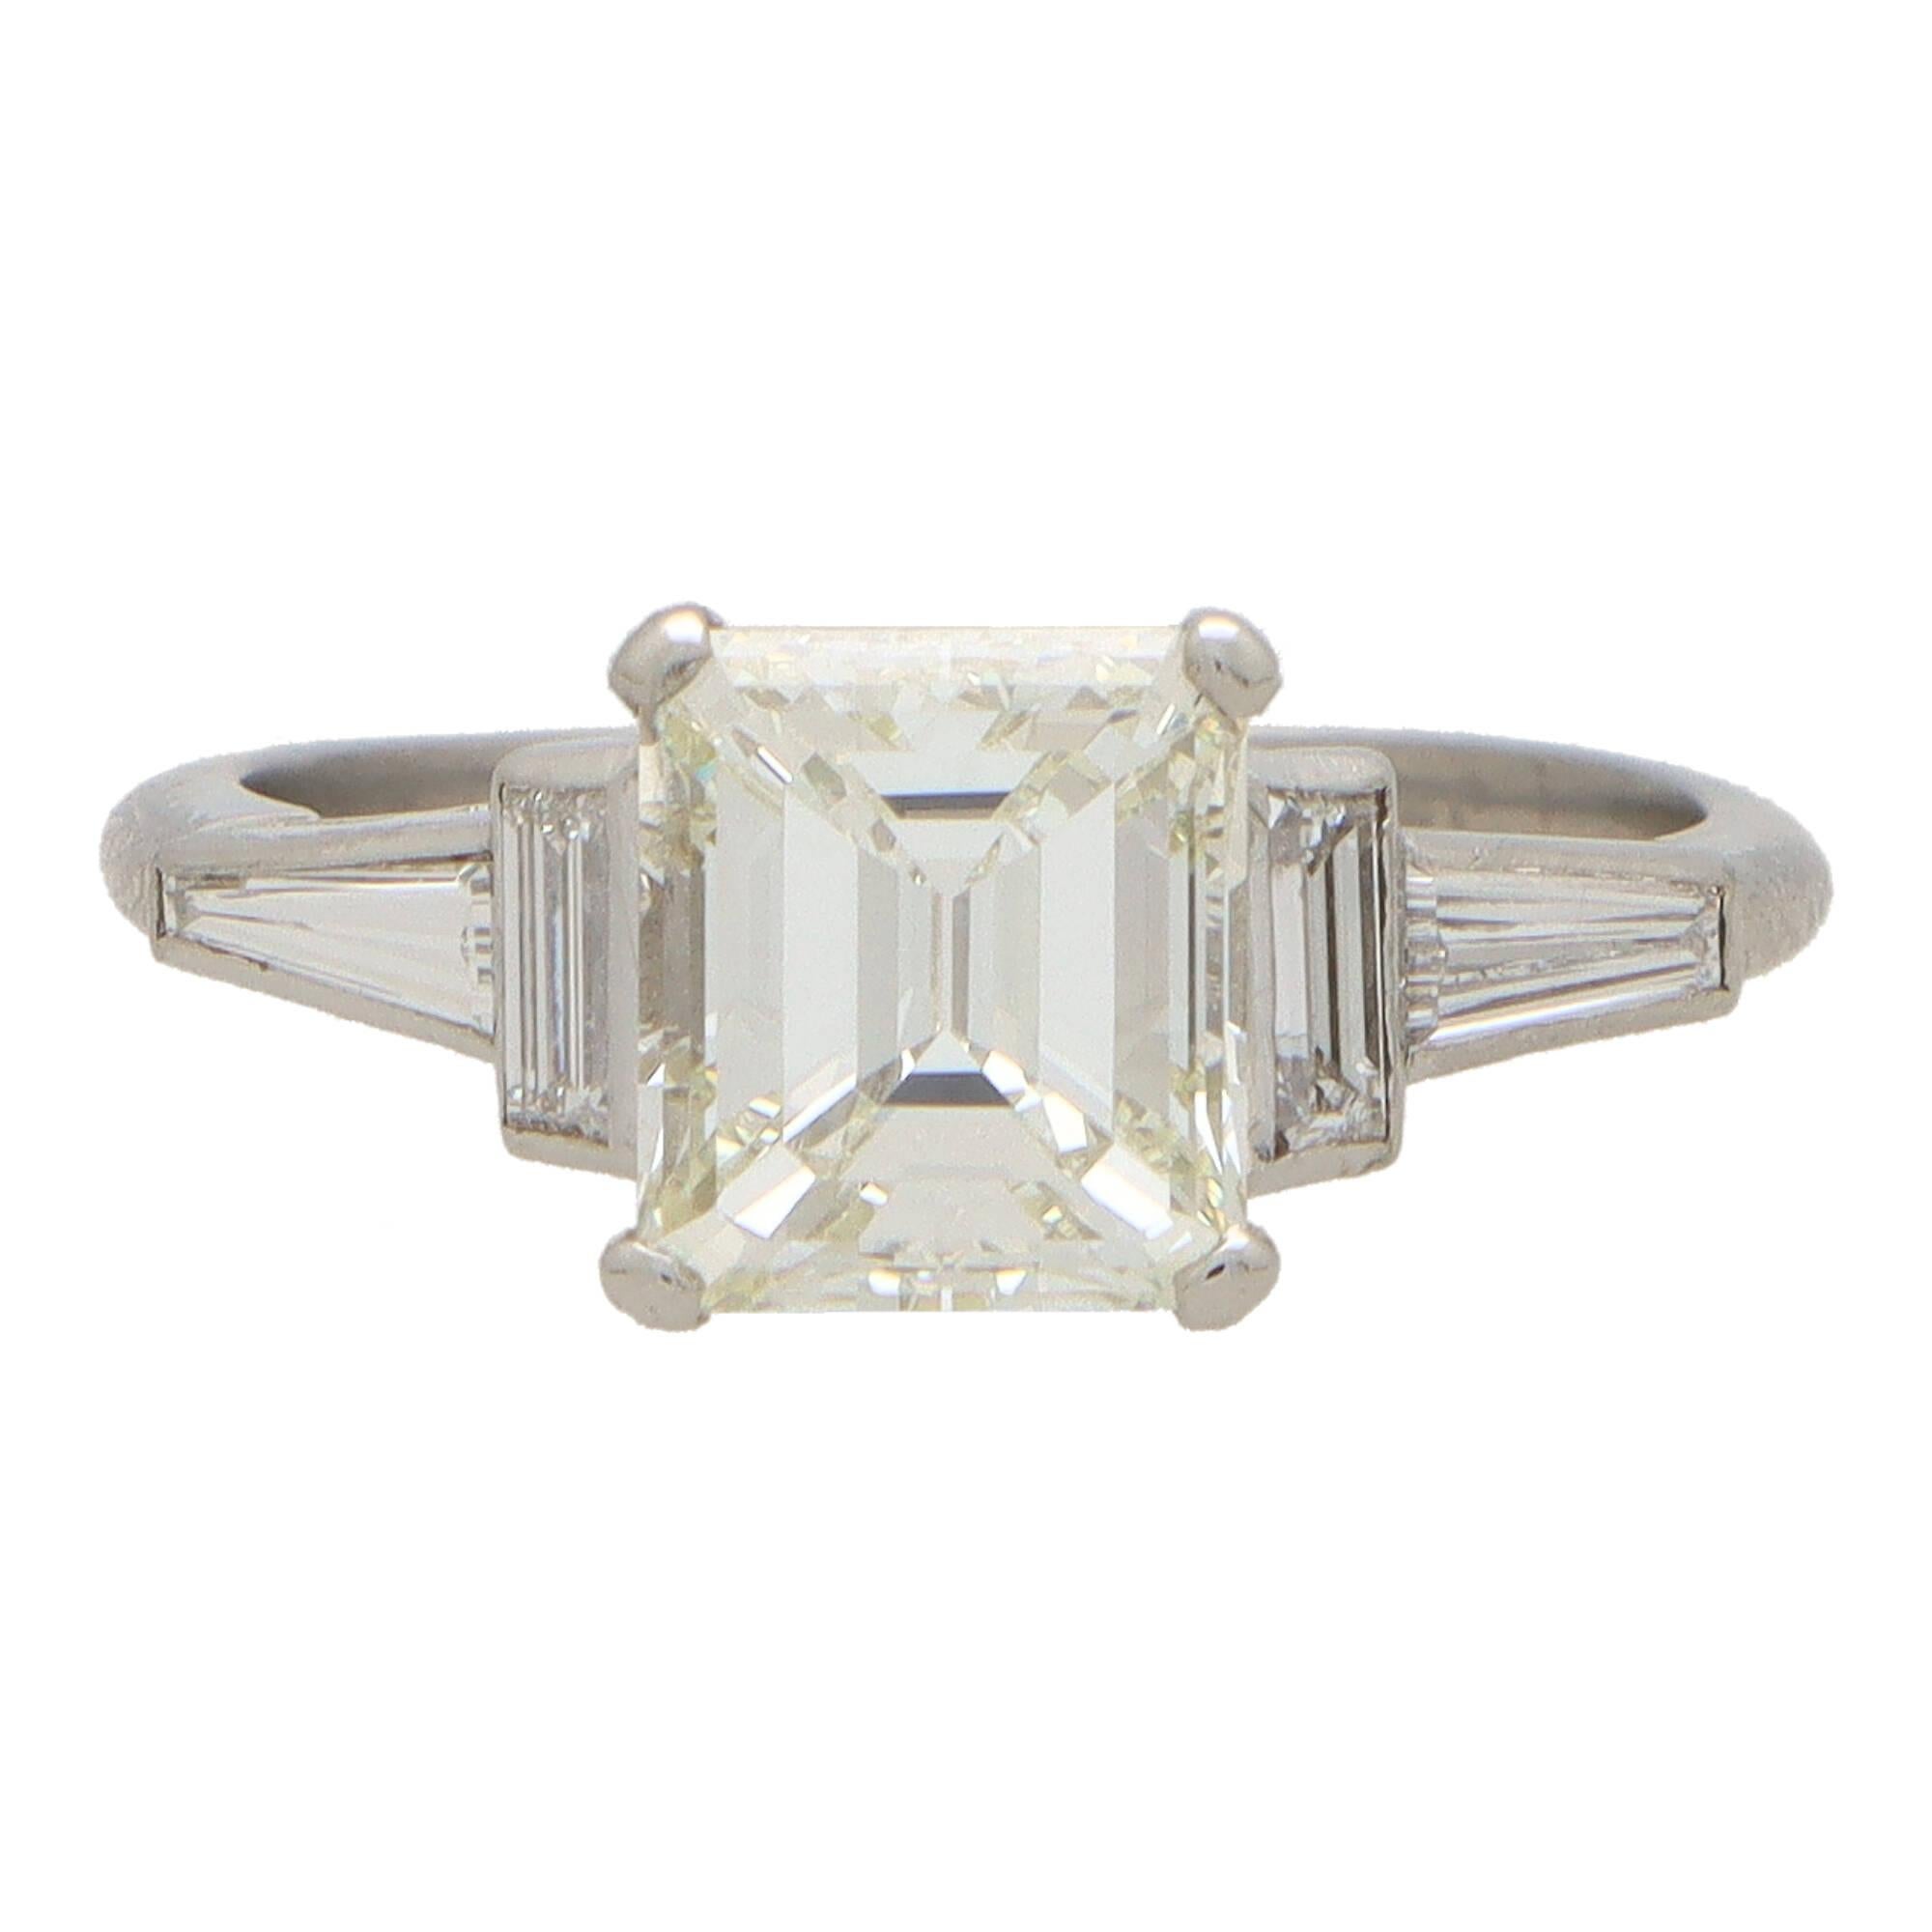 Art Deco Inspired GIA Certified Emerald Cut Diamond Ring in Platinum In Excellent Condition For Sale In London, GB